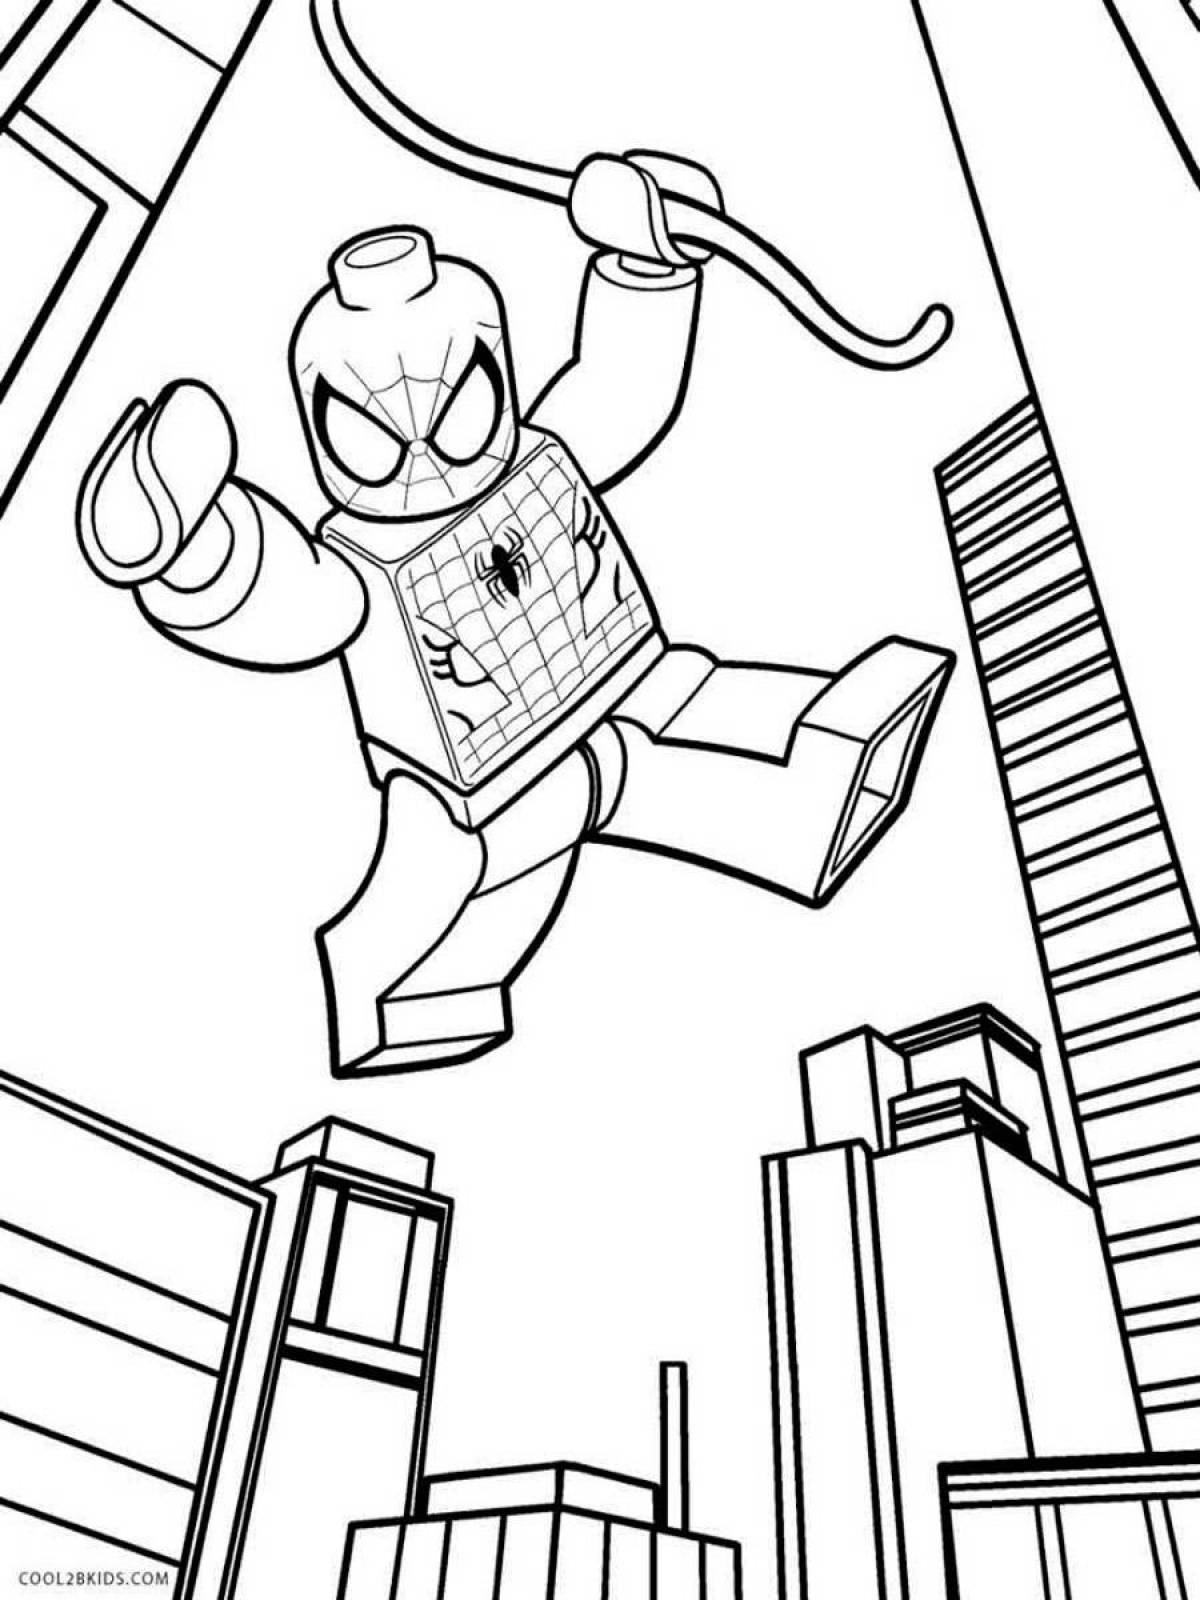 Amazing lego spider man coloring page